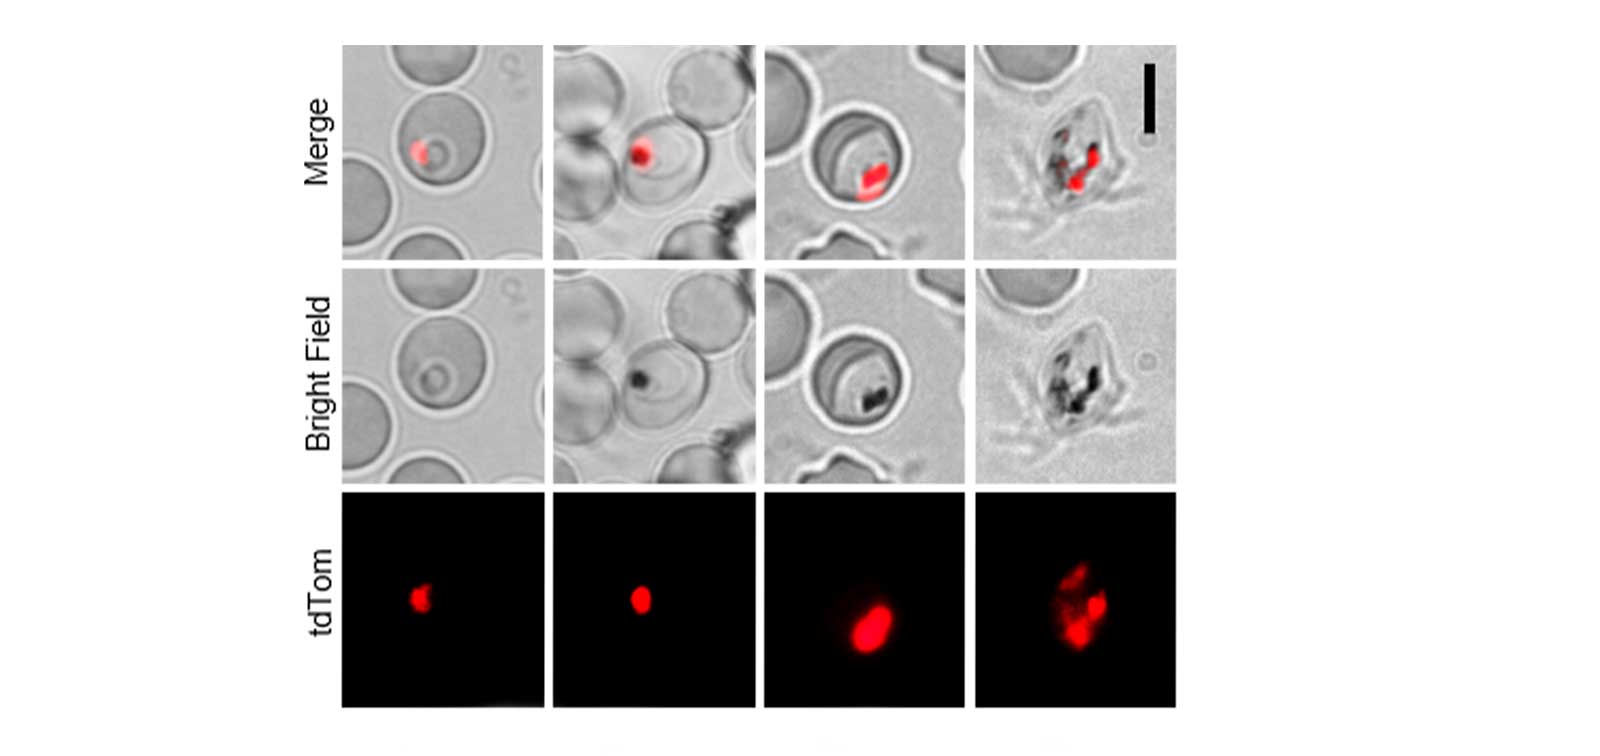 Fluorescence microscopy of the sexual stages of the new malaria parasite reporter line showing red fluorescence under the control of gexp02 promoter